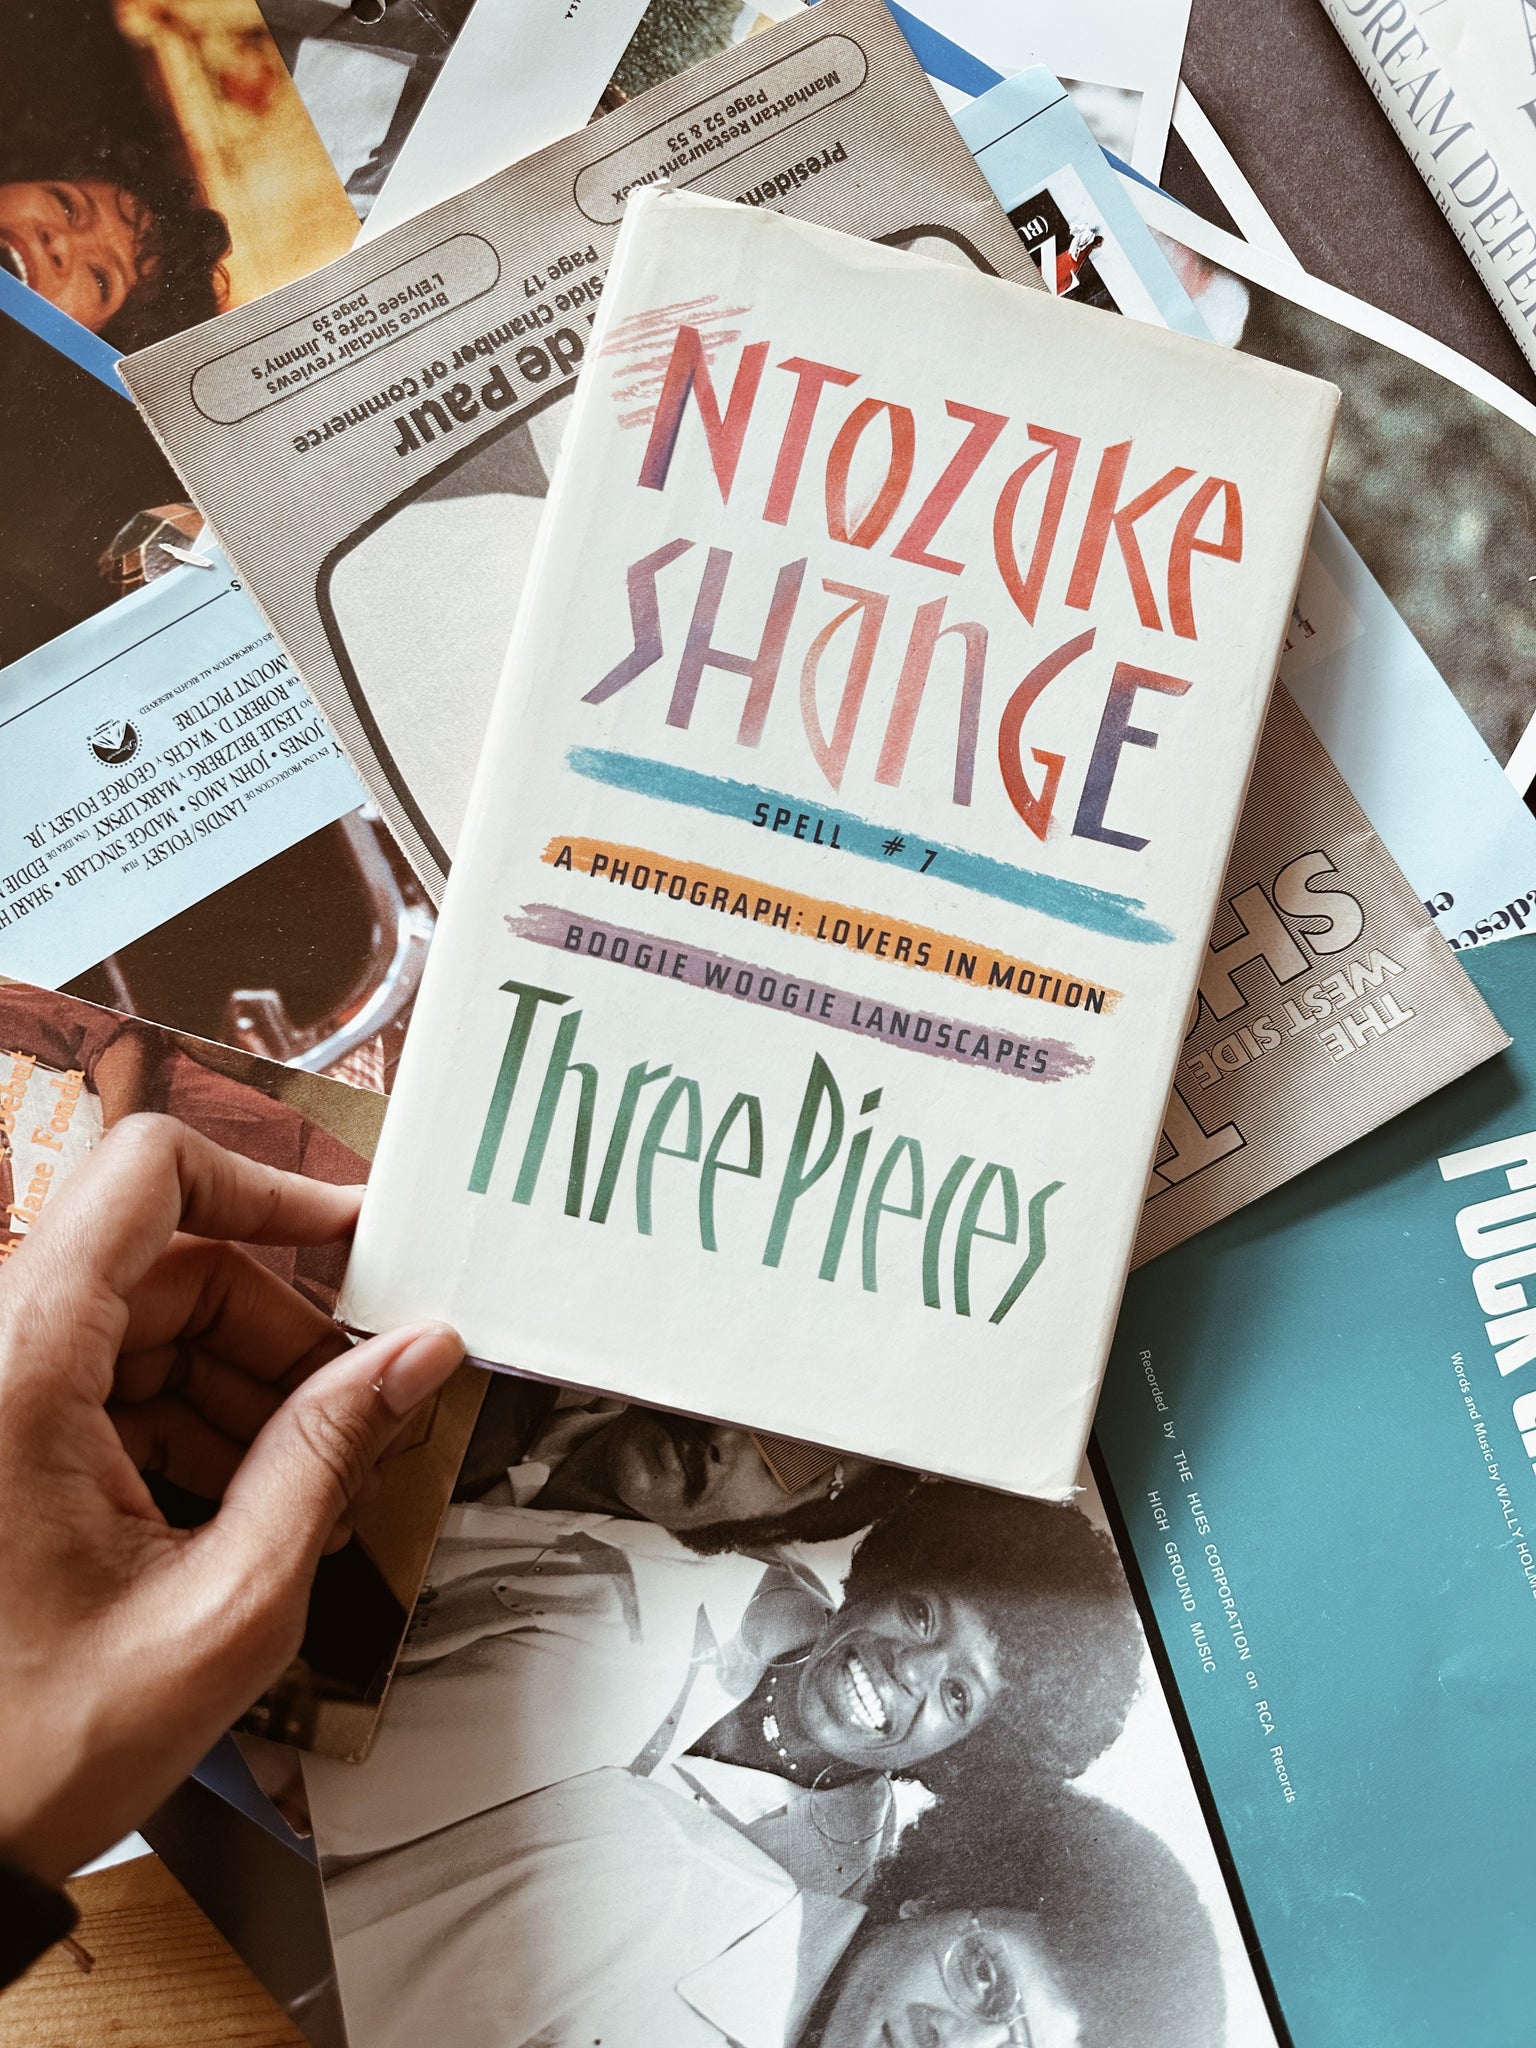 Vintage SIGNED Hardcover “Three Pieces” by Ntozke Shange